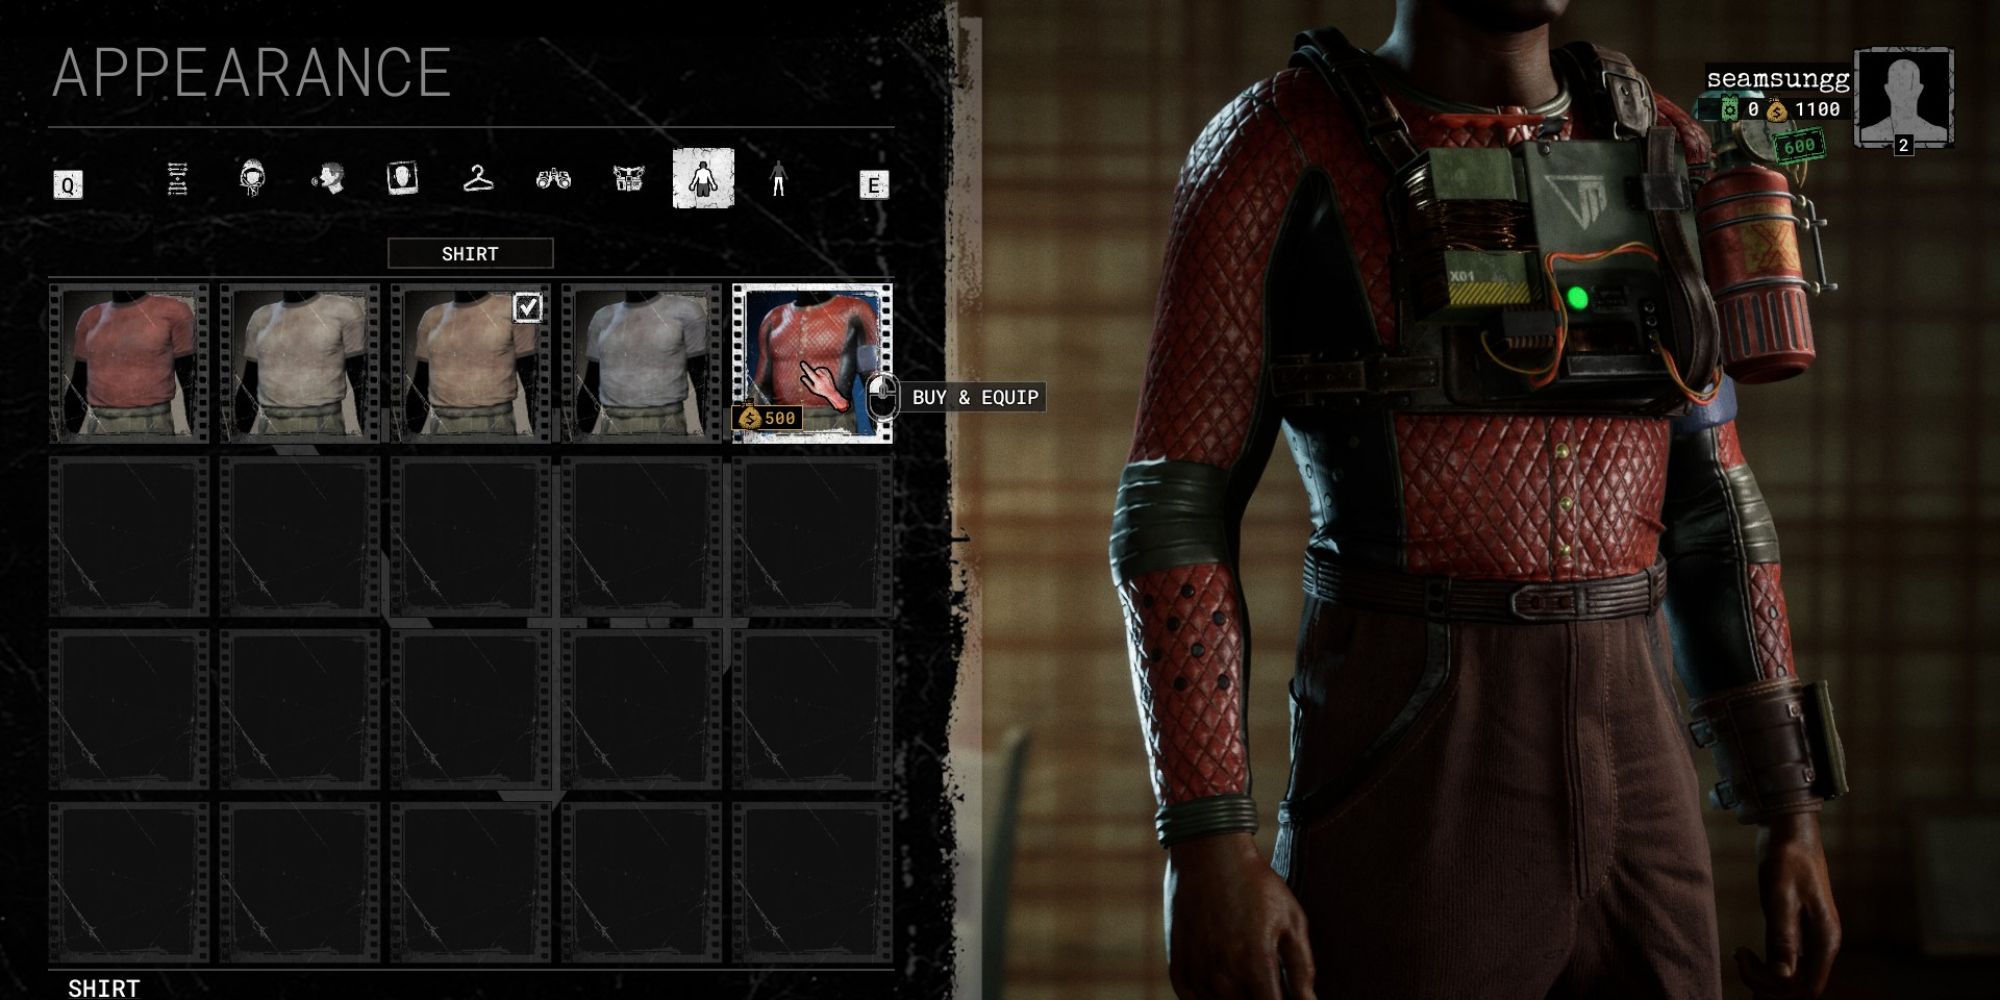 outlast trials player selecting shirt in appearance menu